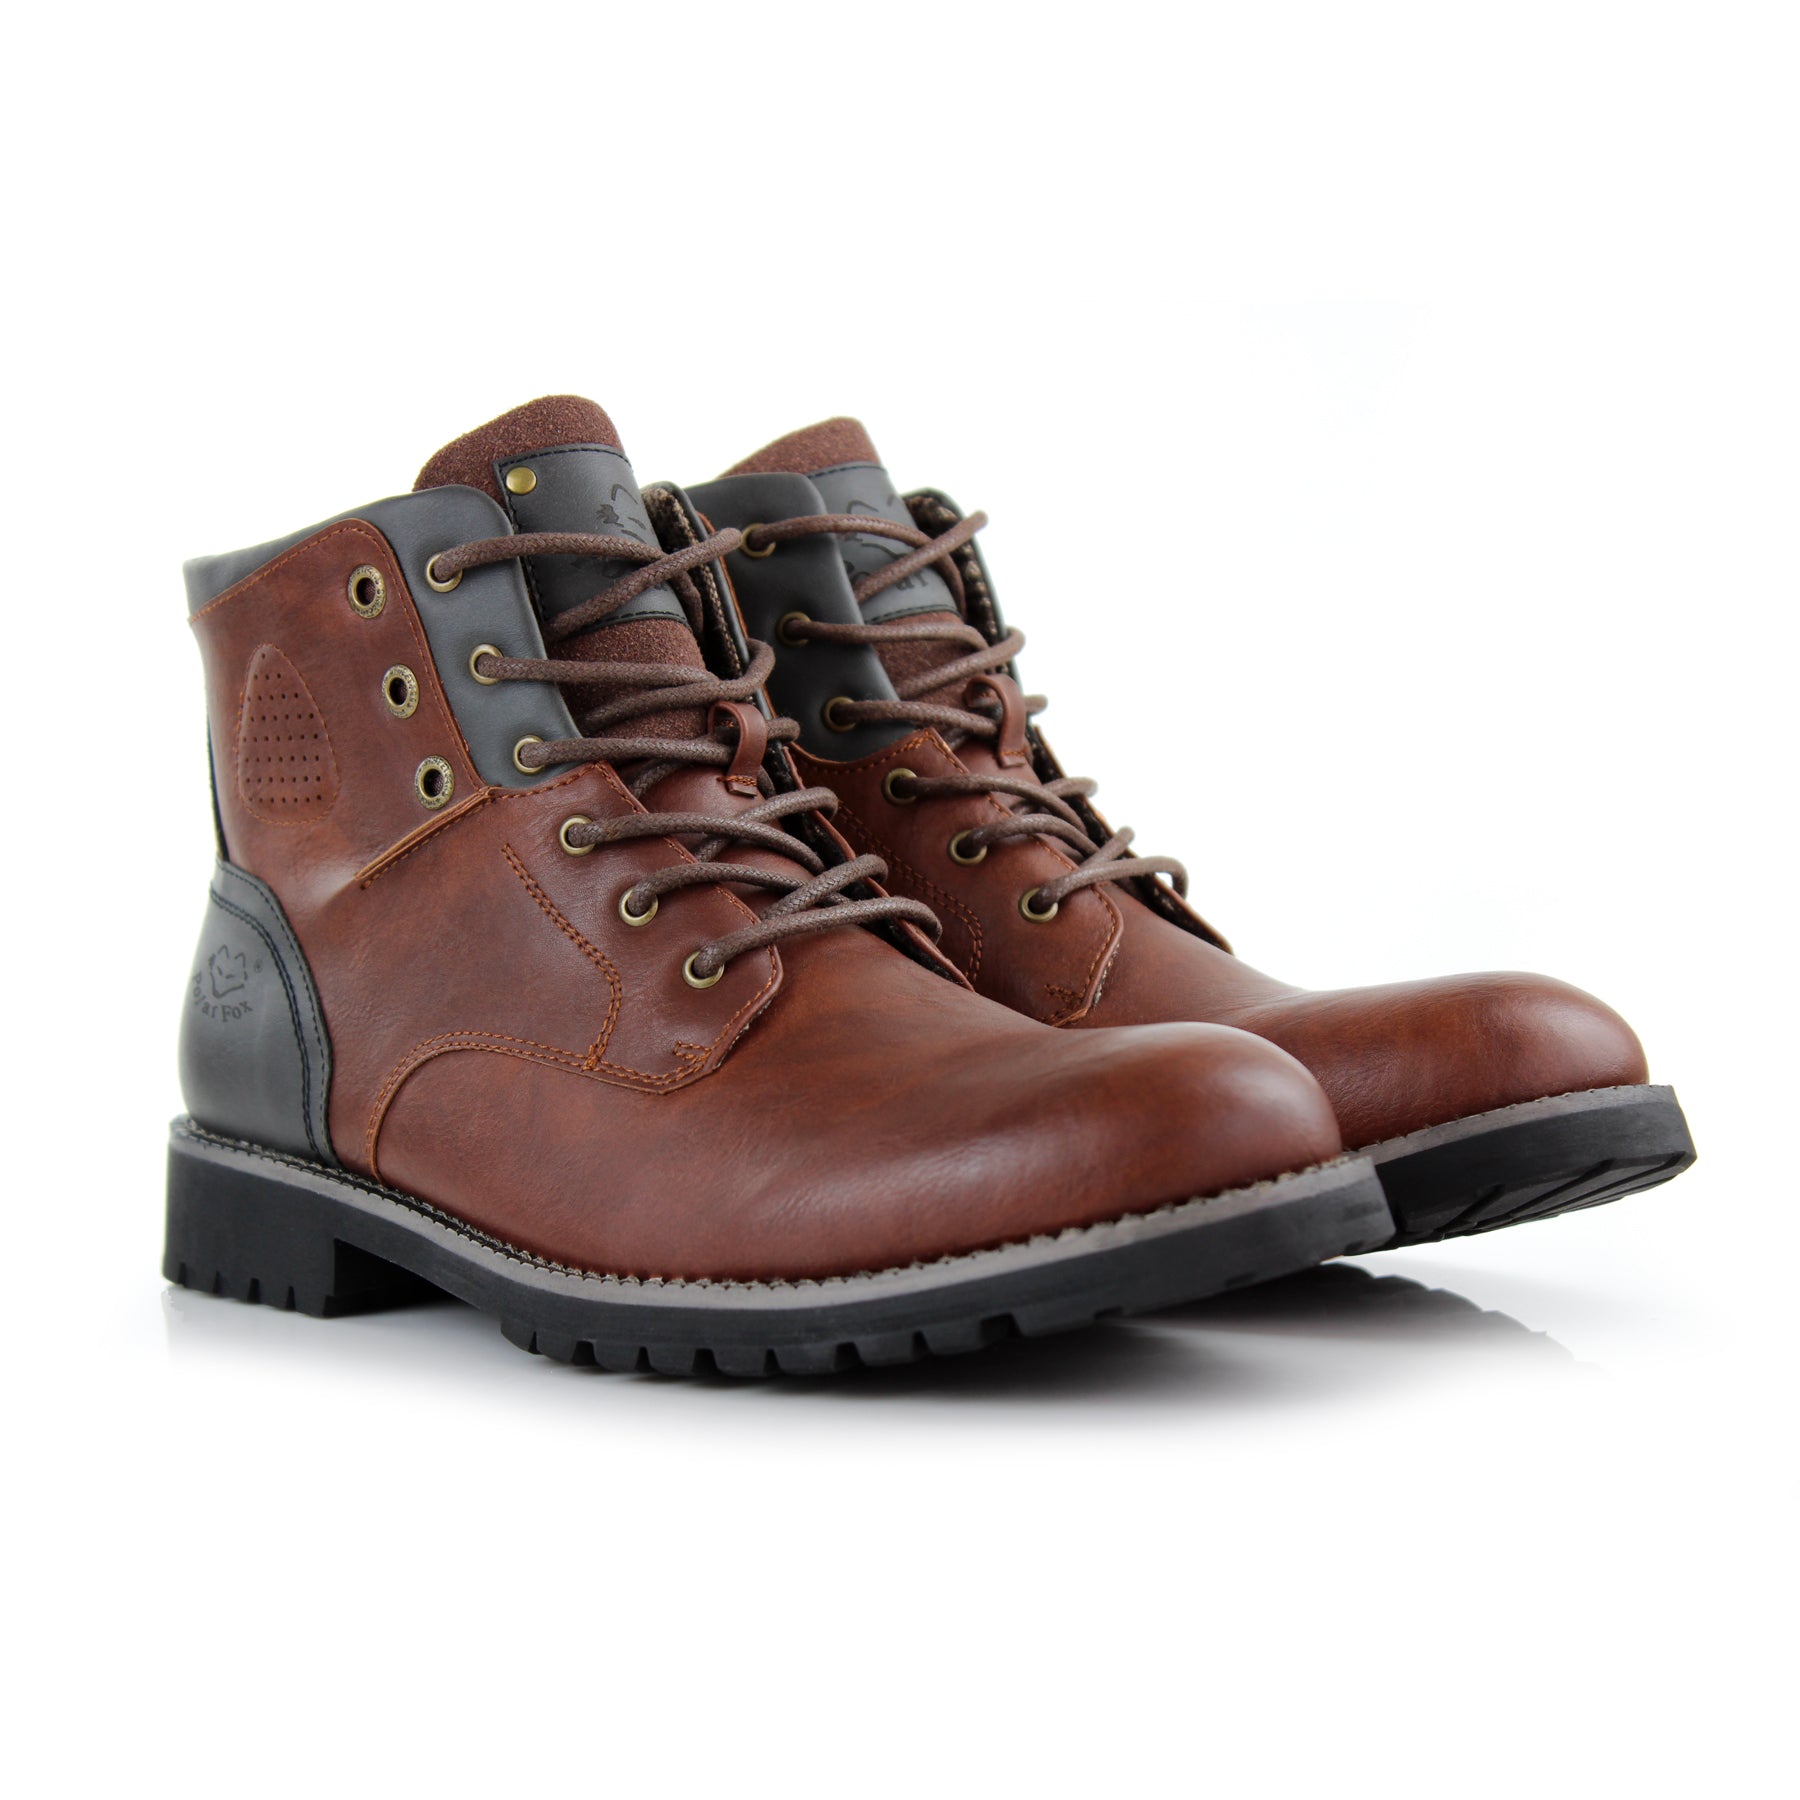 Two-Toned Rugged Boots | Homer by Polar Fox | Conal Footwear | Paired Angle View